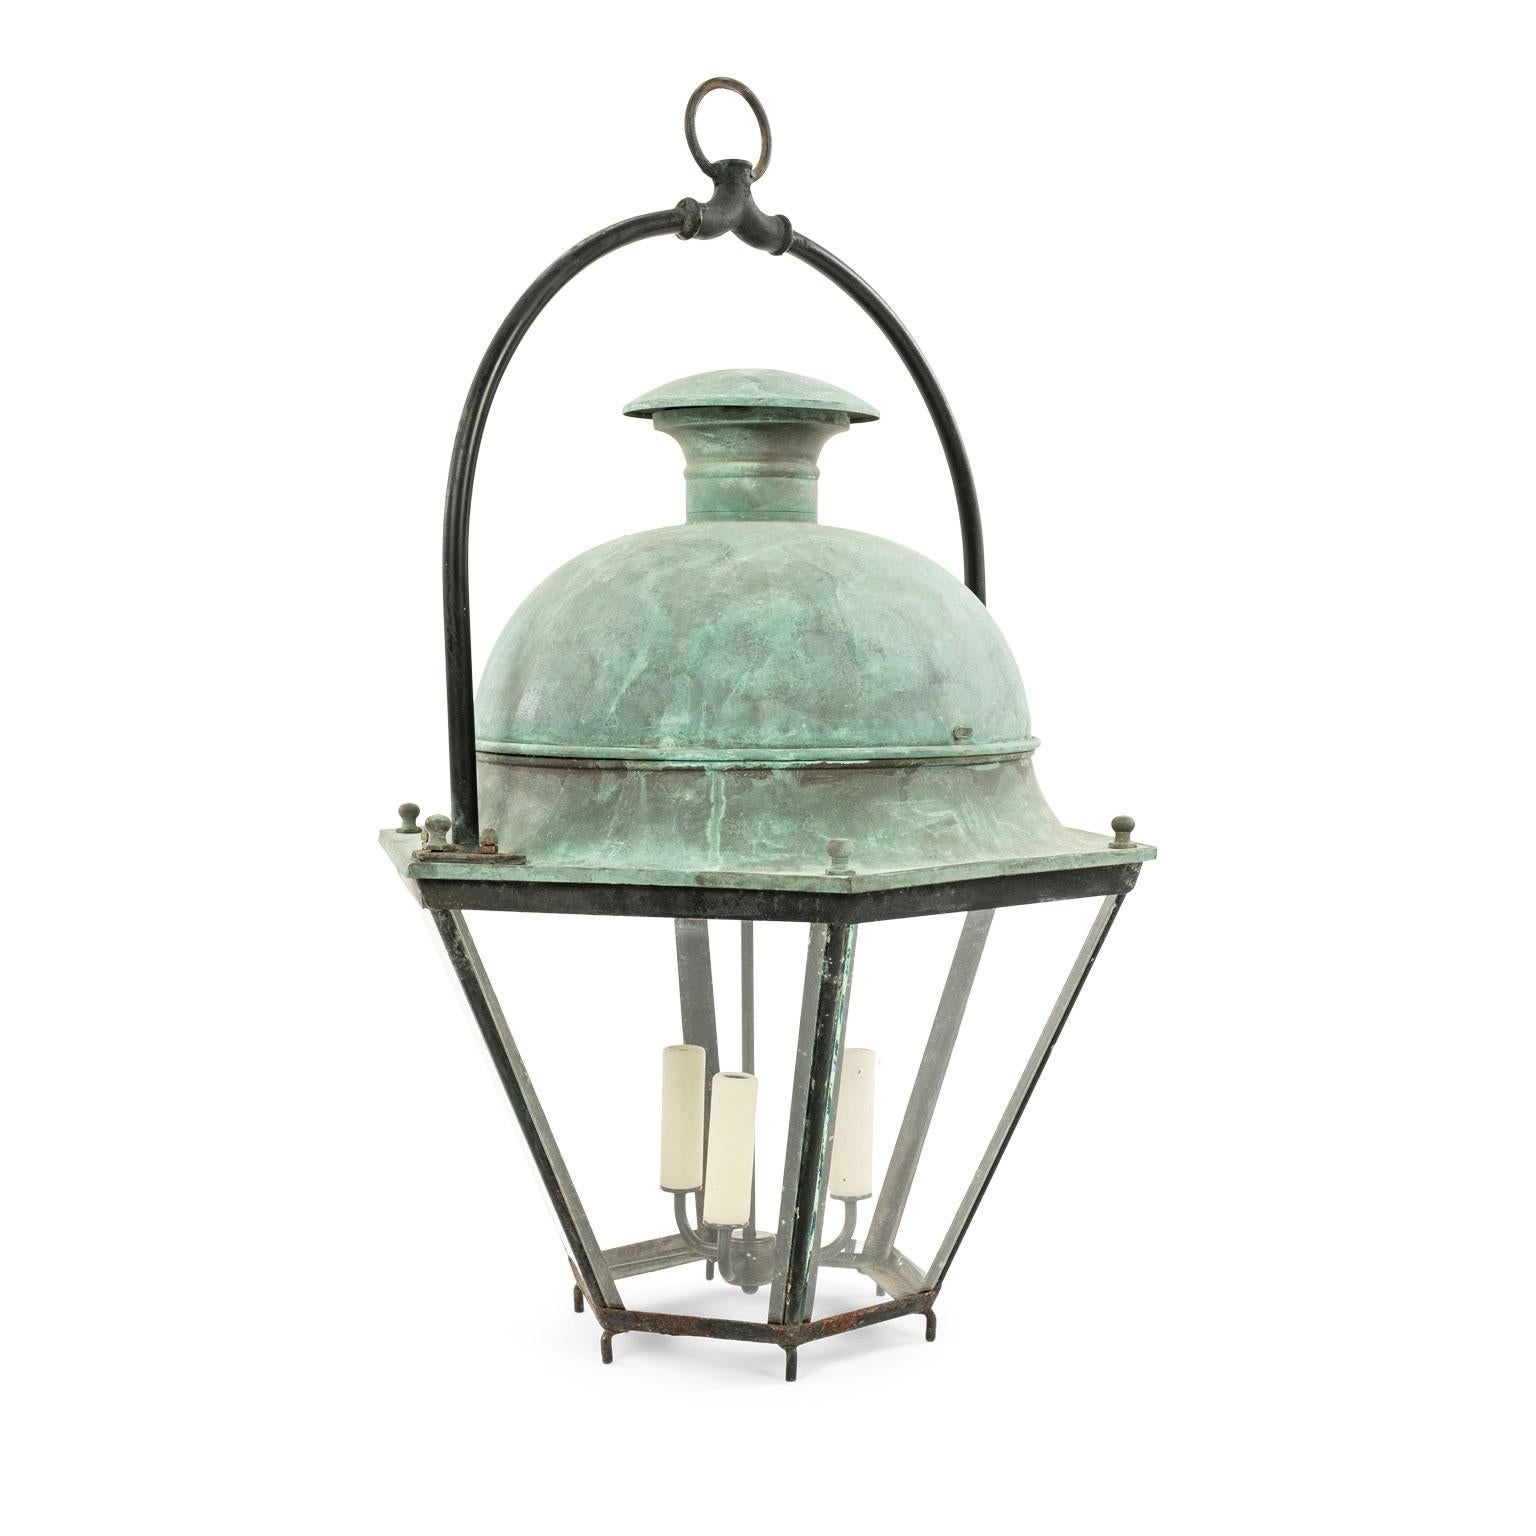 Large French hexagonal green-verdigris copper lantern with domed top and enclosed by glass paneled sides. This vintage lantern originally served as a street light in the South of France. Now features three new candelabra-size lights. Newly wired for